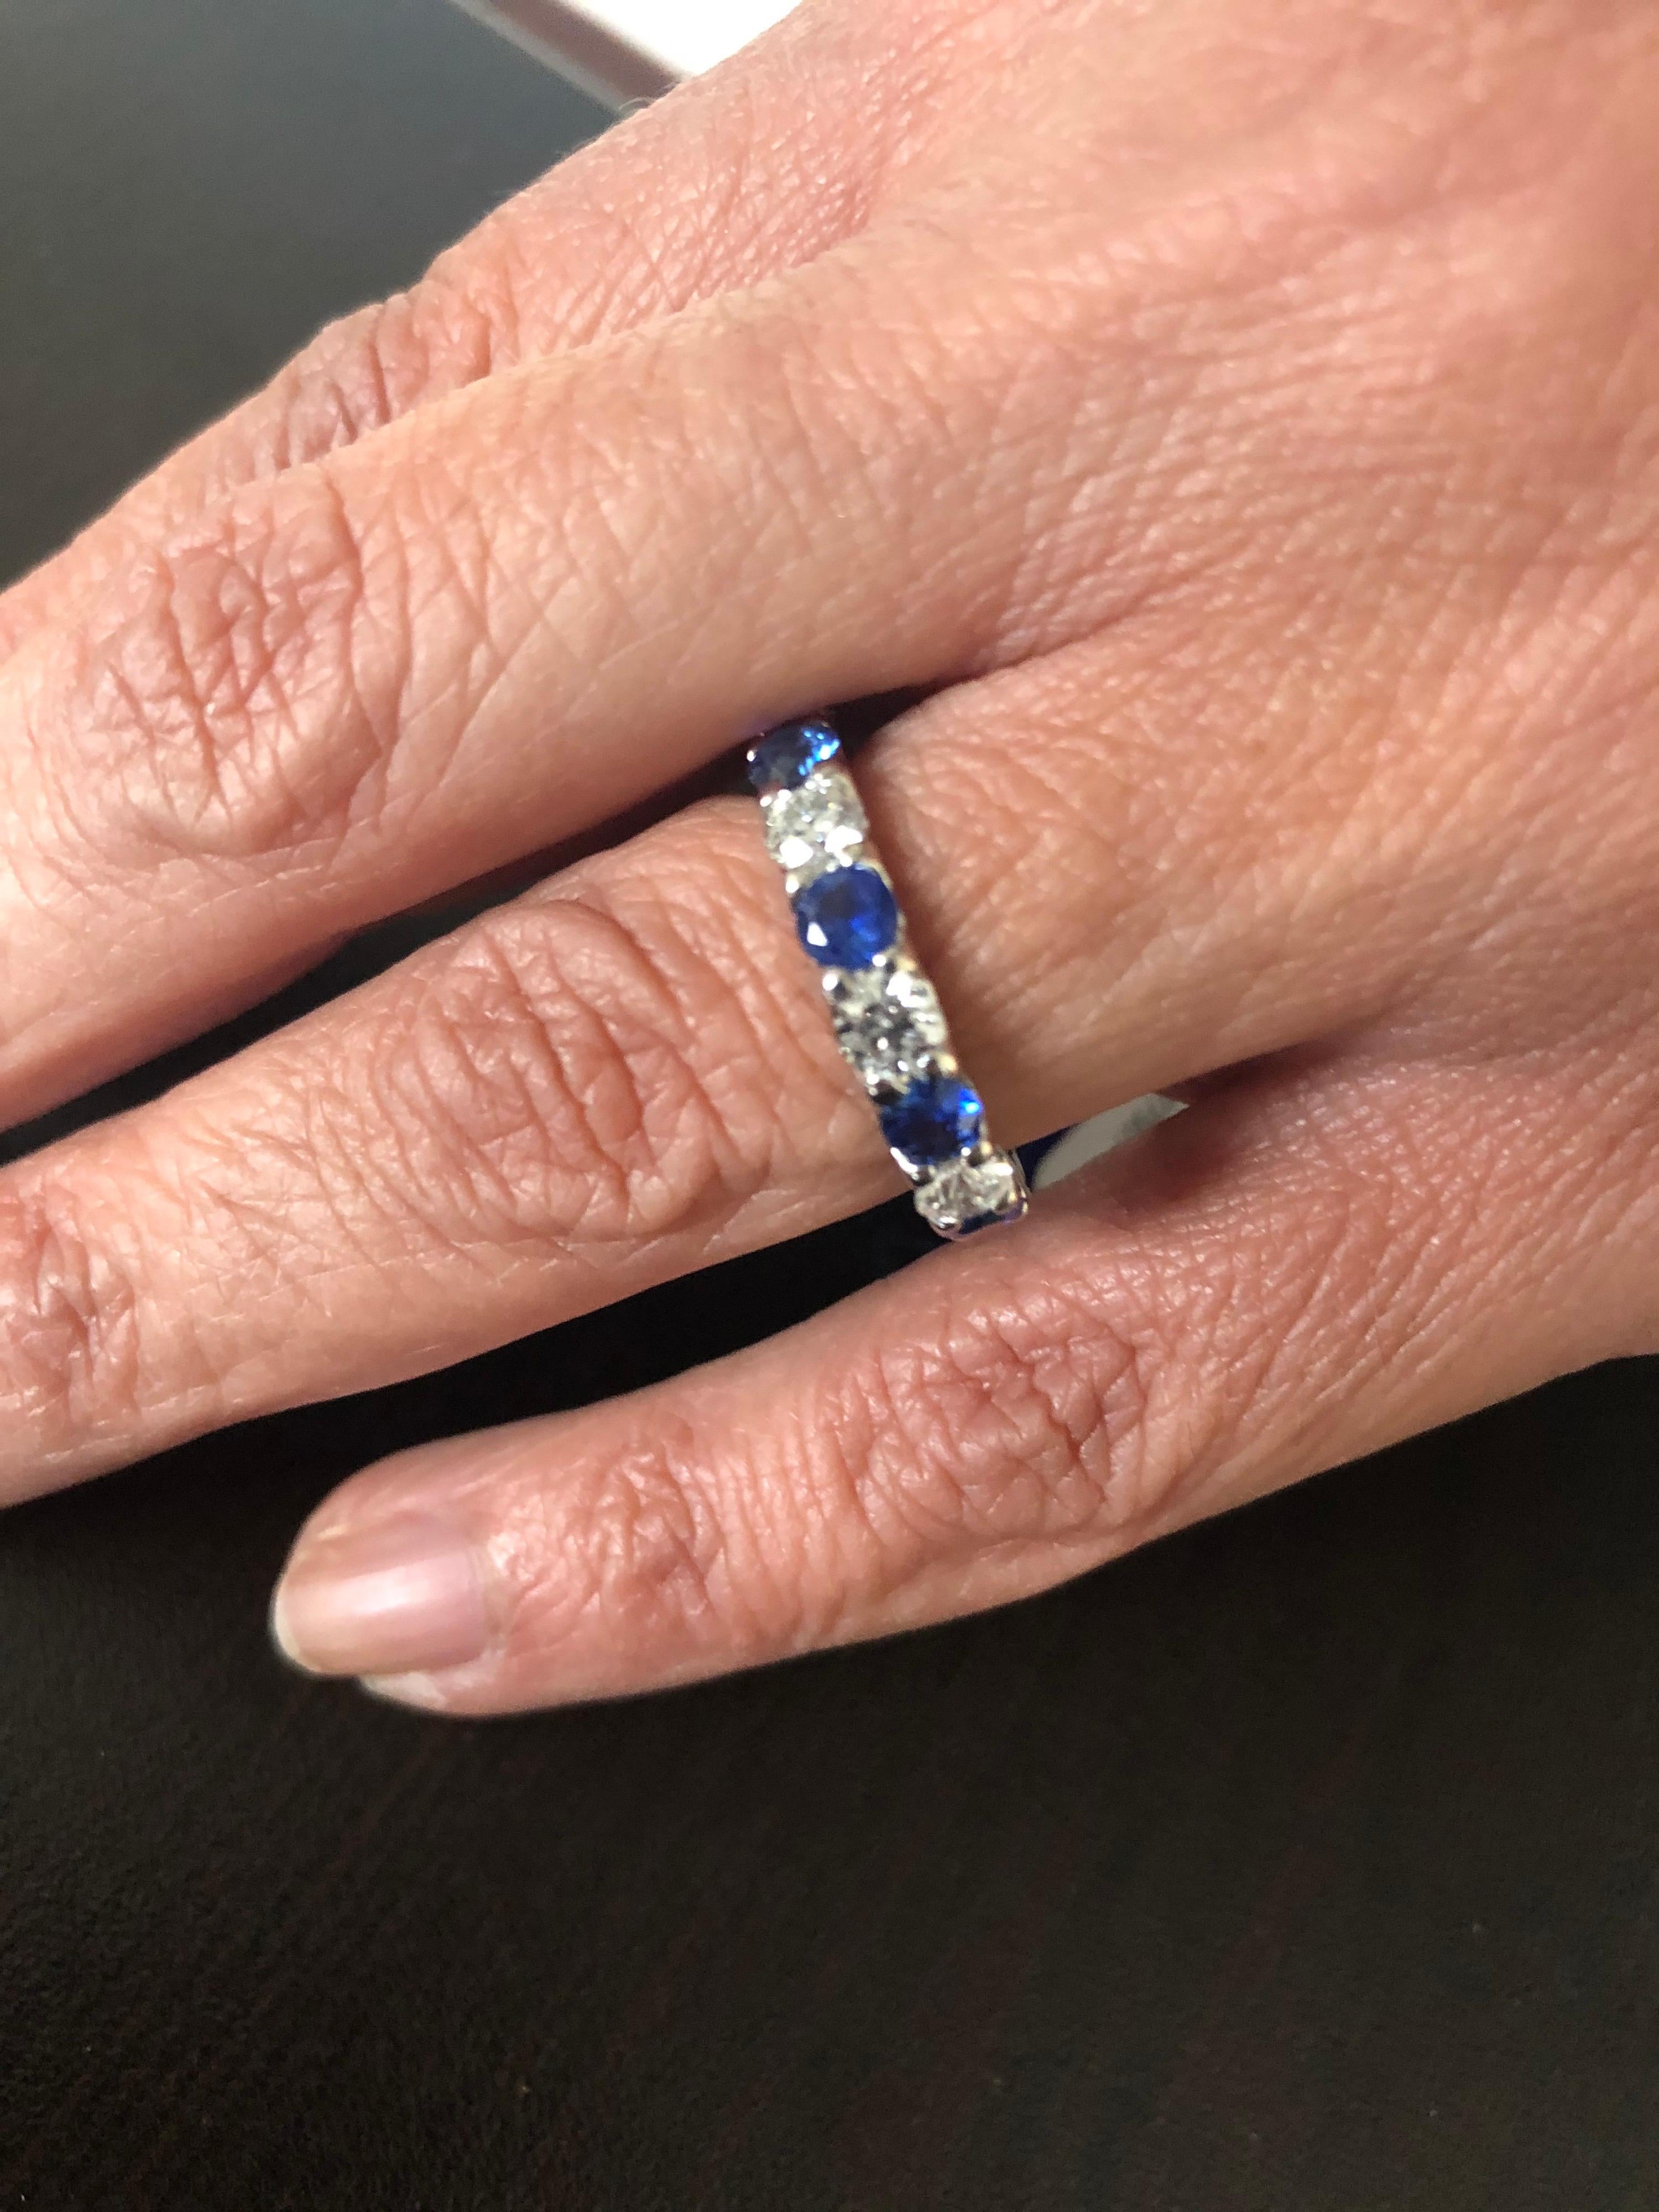 Sapphire and diamond alternating set in 14K white gold. The eternity band is a U-prong low setting. The sapphires are Ceylon and the total weight is 1.73 carats. The diamonds are 1.57 carats total. The color of the stones are G-H, the clarity is